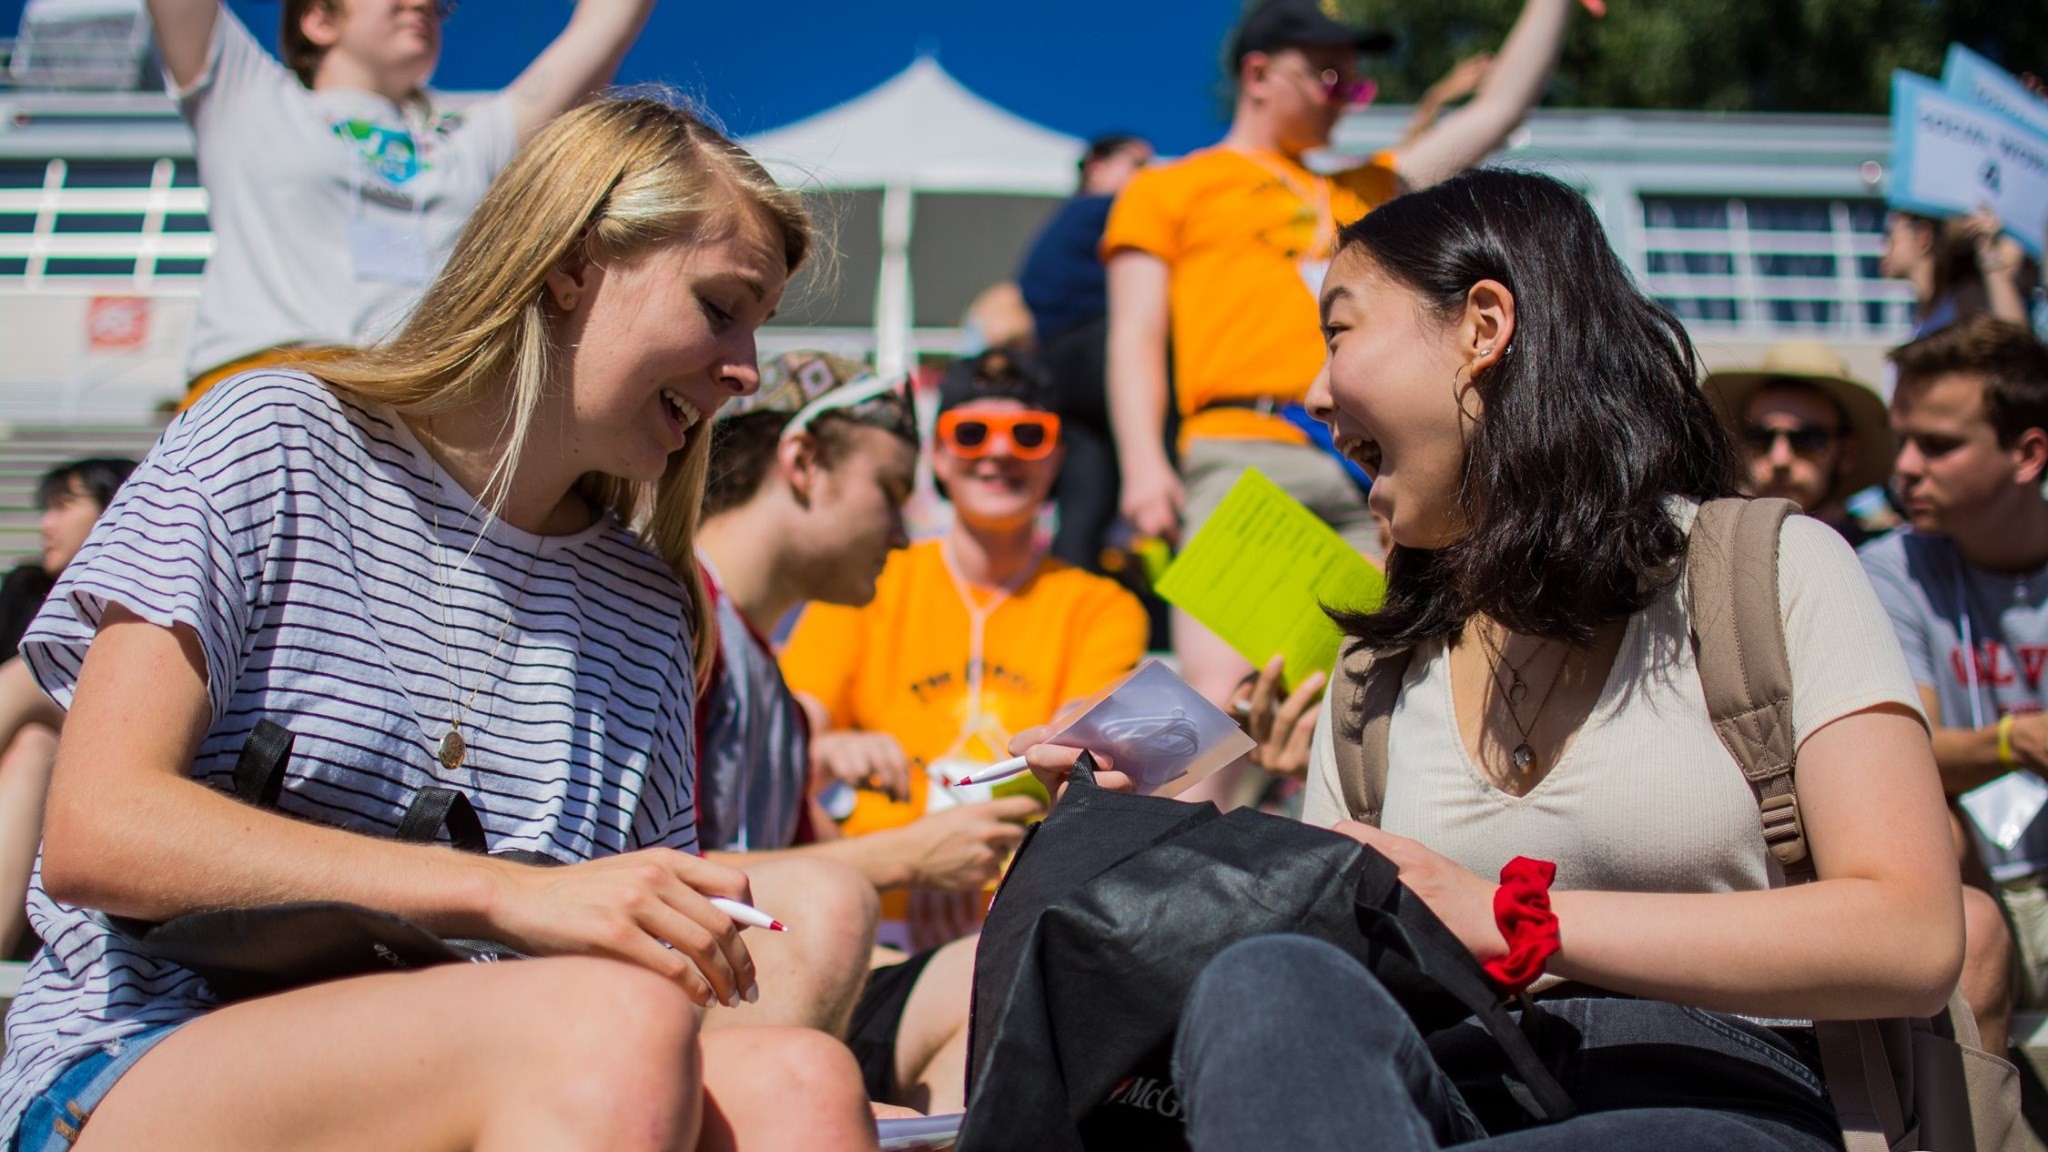 a blonde student and a dark-haired student smile joyfully while sitting in a crowd in the sun